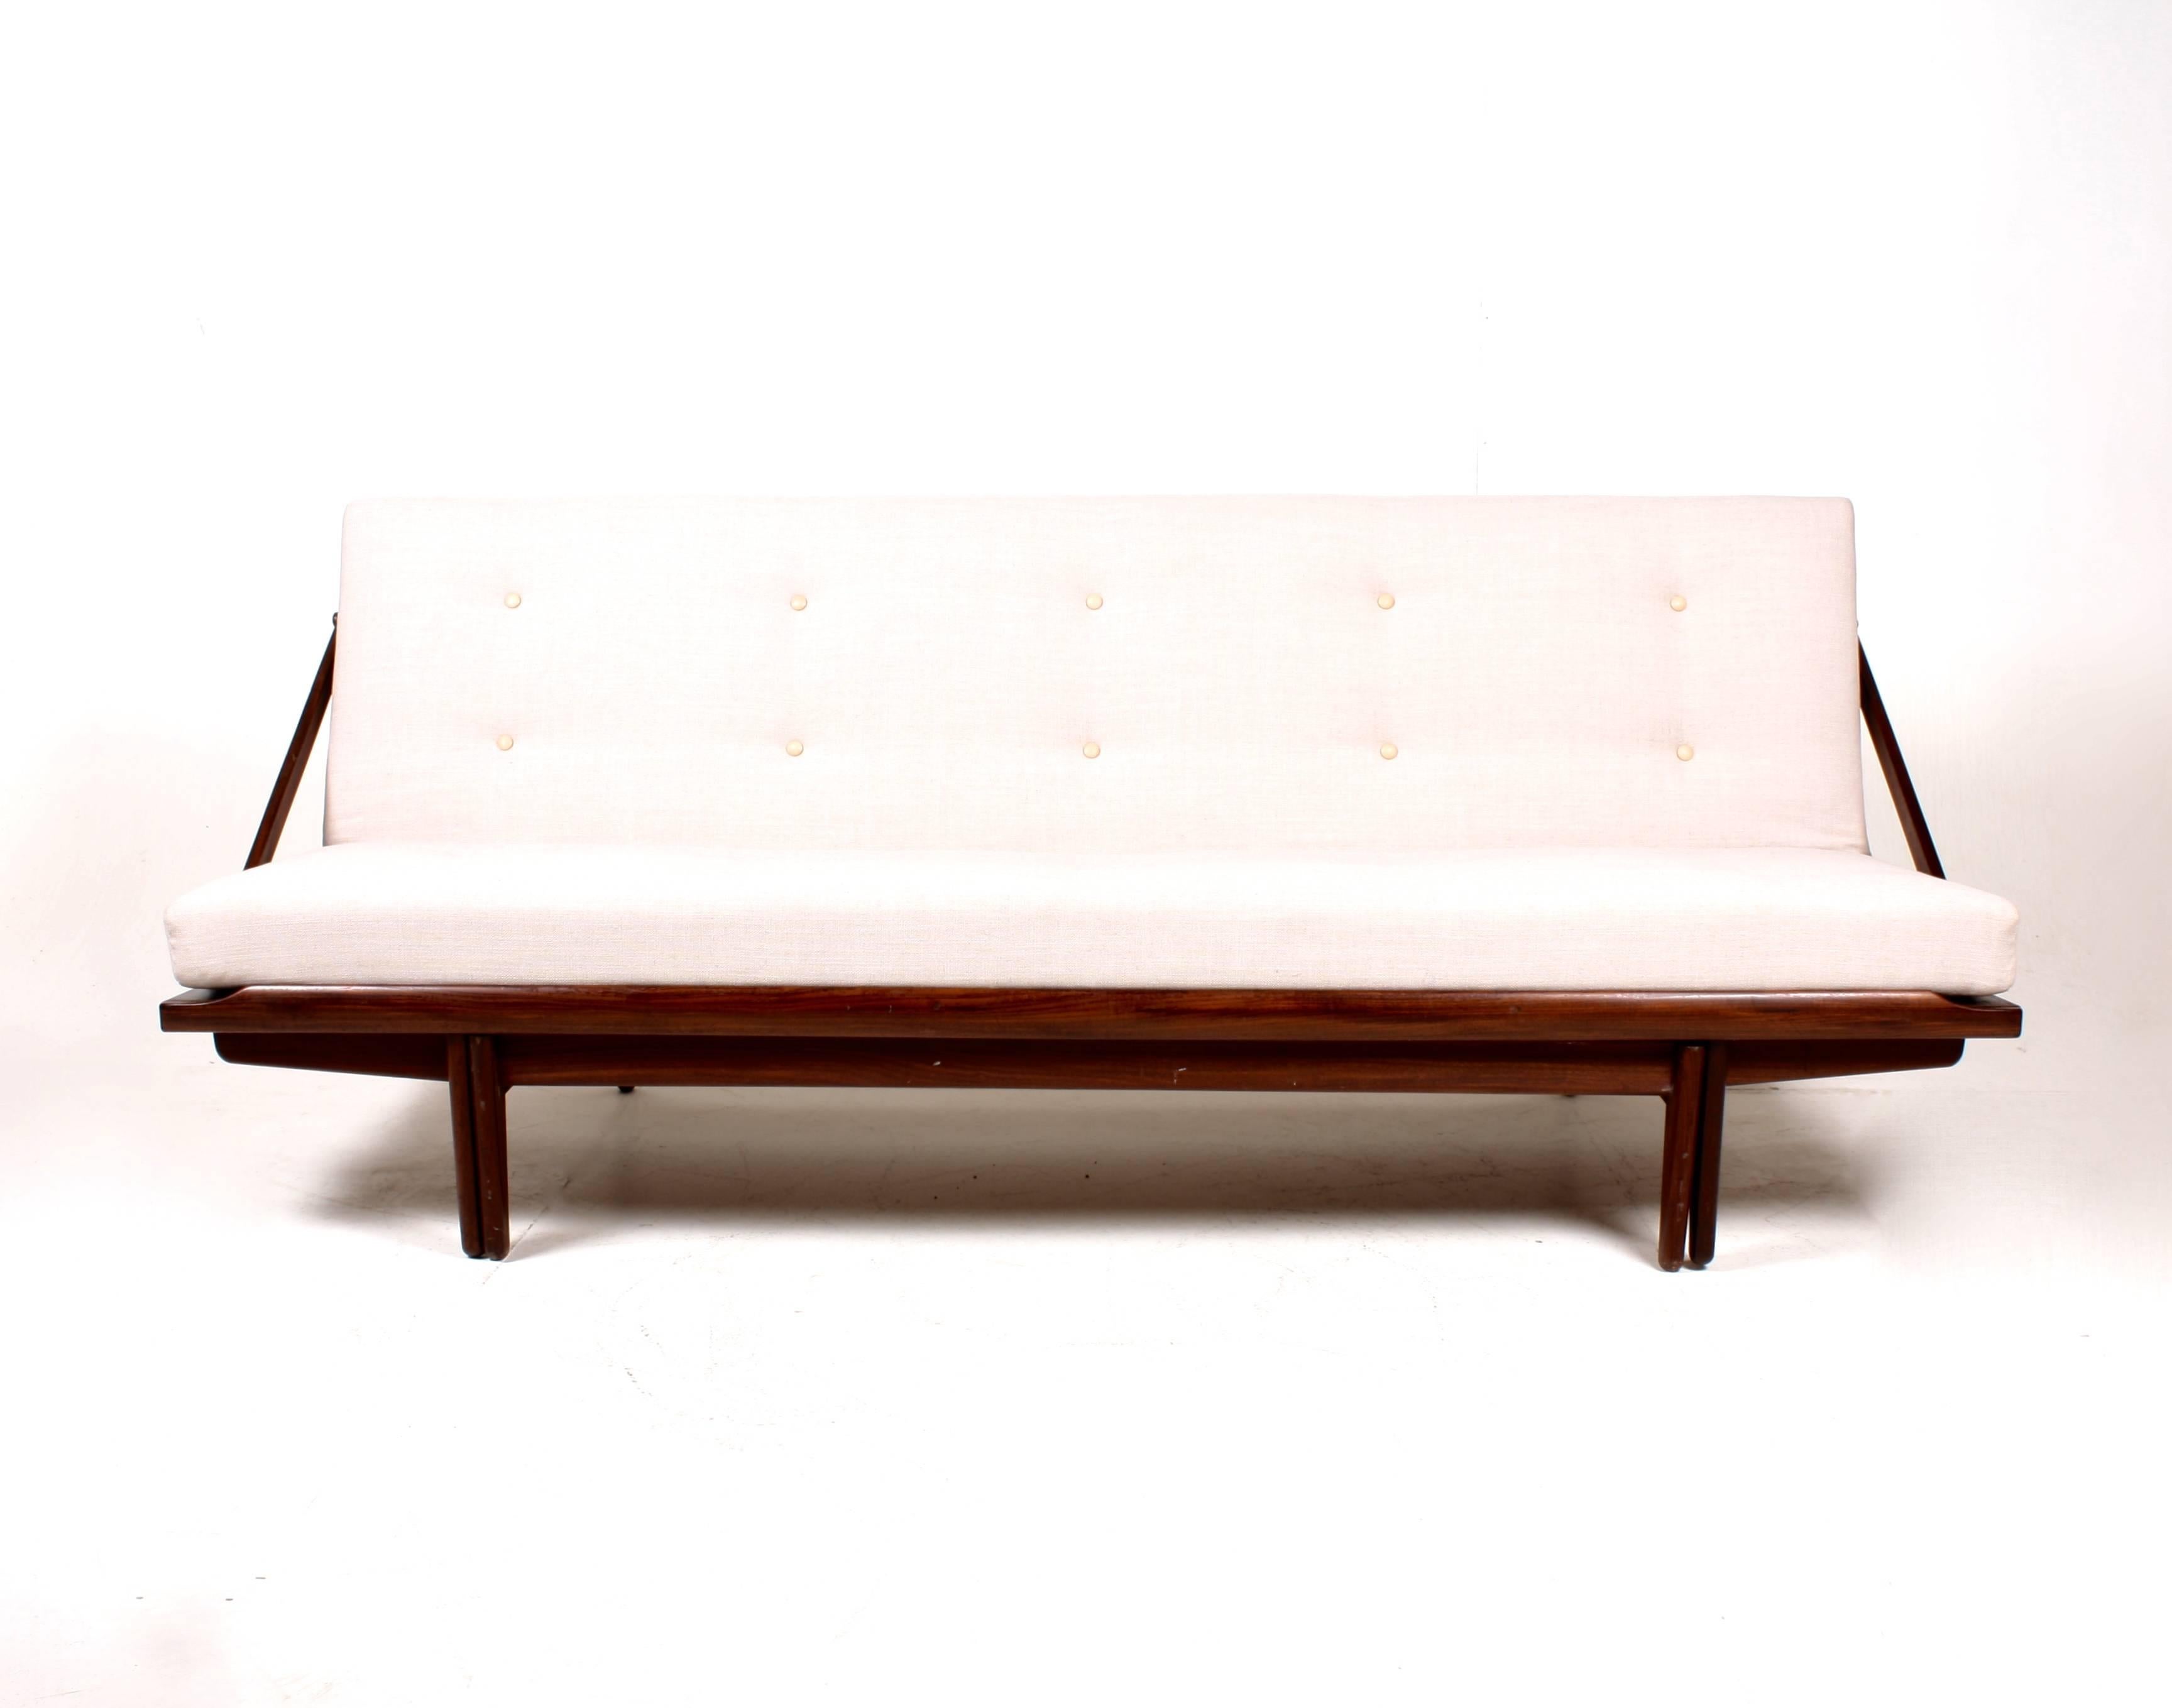 Poul Volther daybed. Seat and flip back upholstered in light new wool with leather buttons. Frame in solid teak. Manufactured by Frem Røjle, Denmark in the 1950s. Great condition.